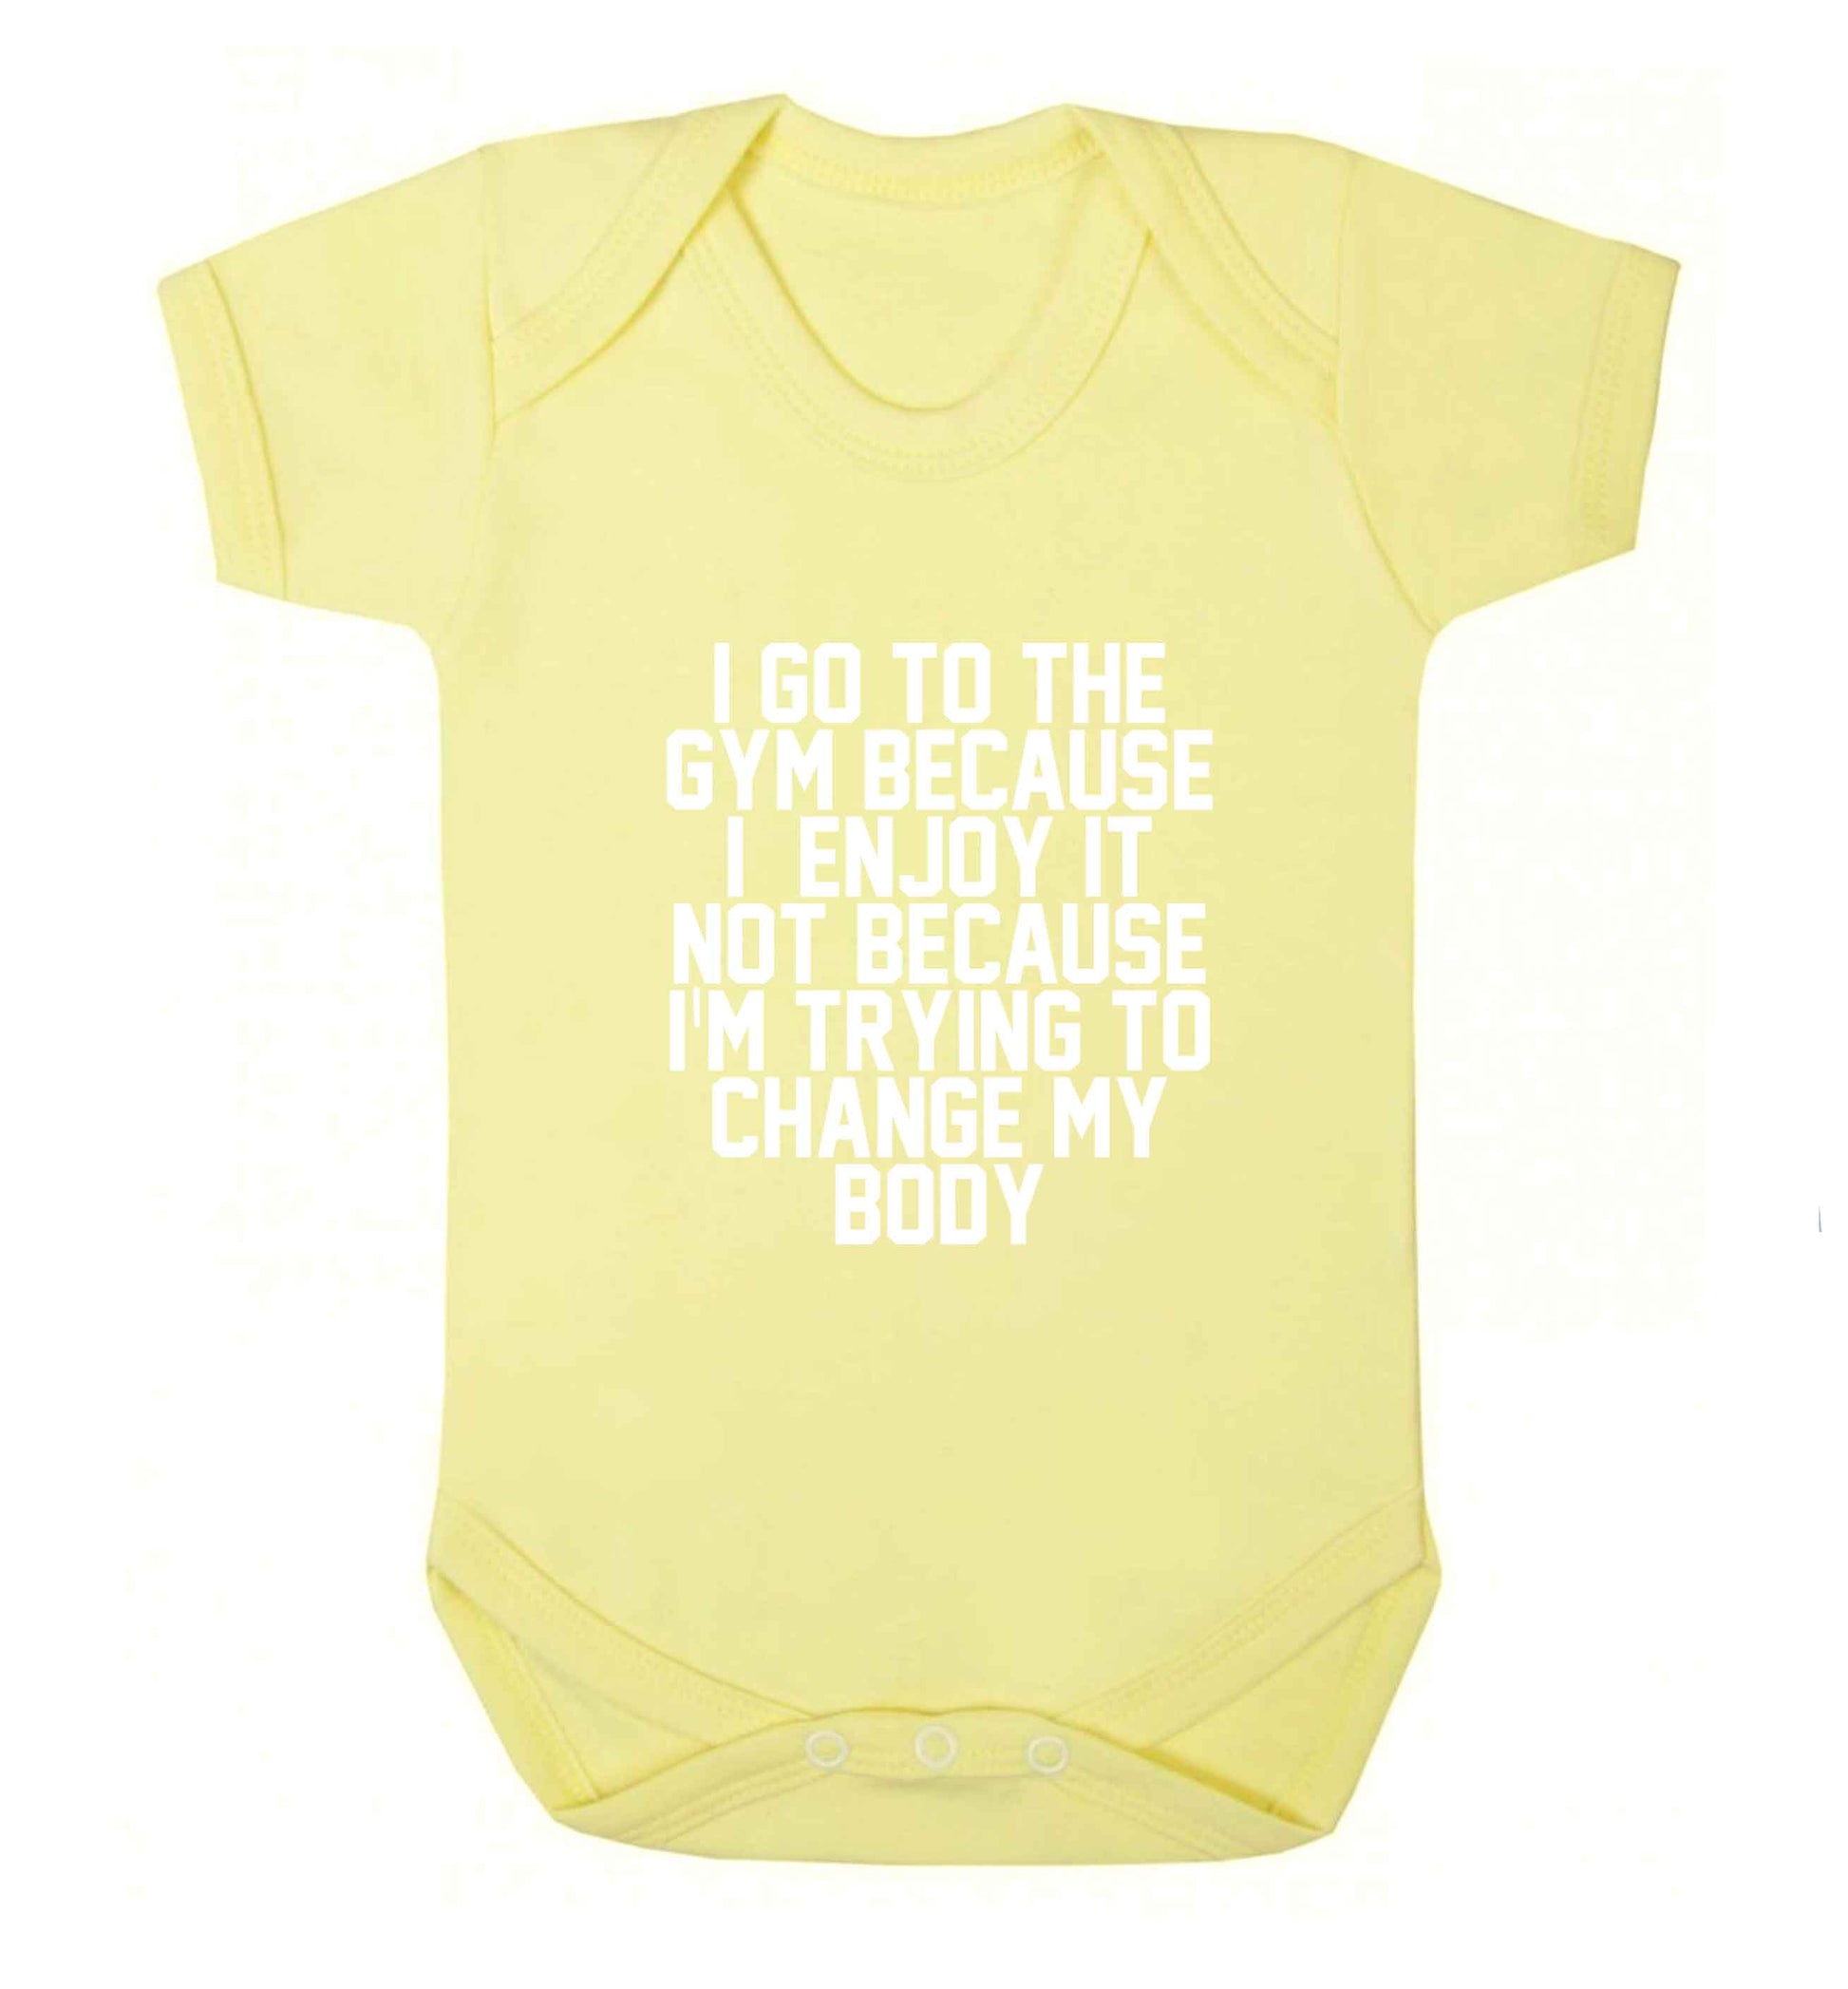 I go to the gym because I enjoy it not because I'm trying to change my body baby vest pale yellow 18-24 months